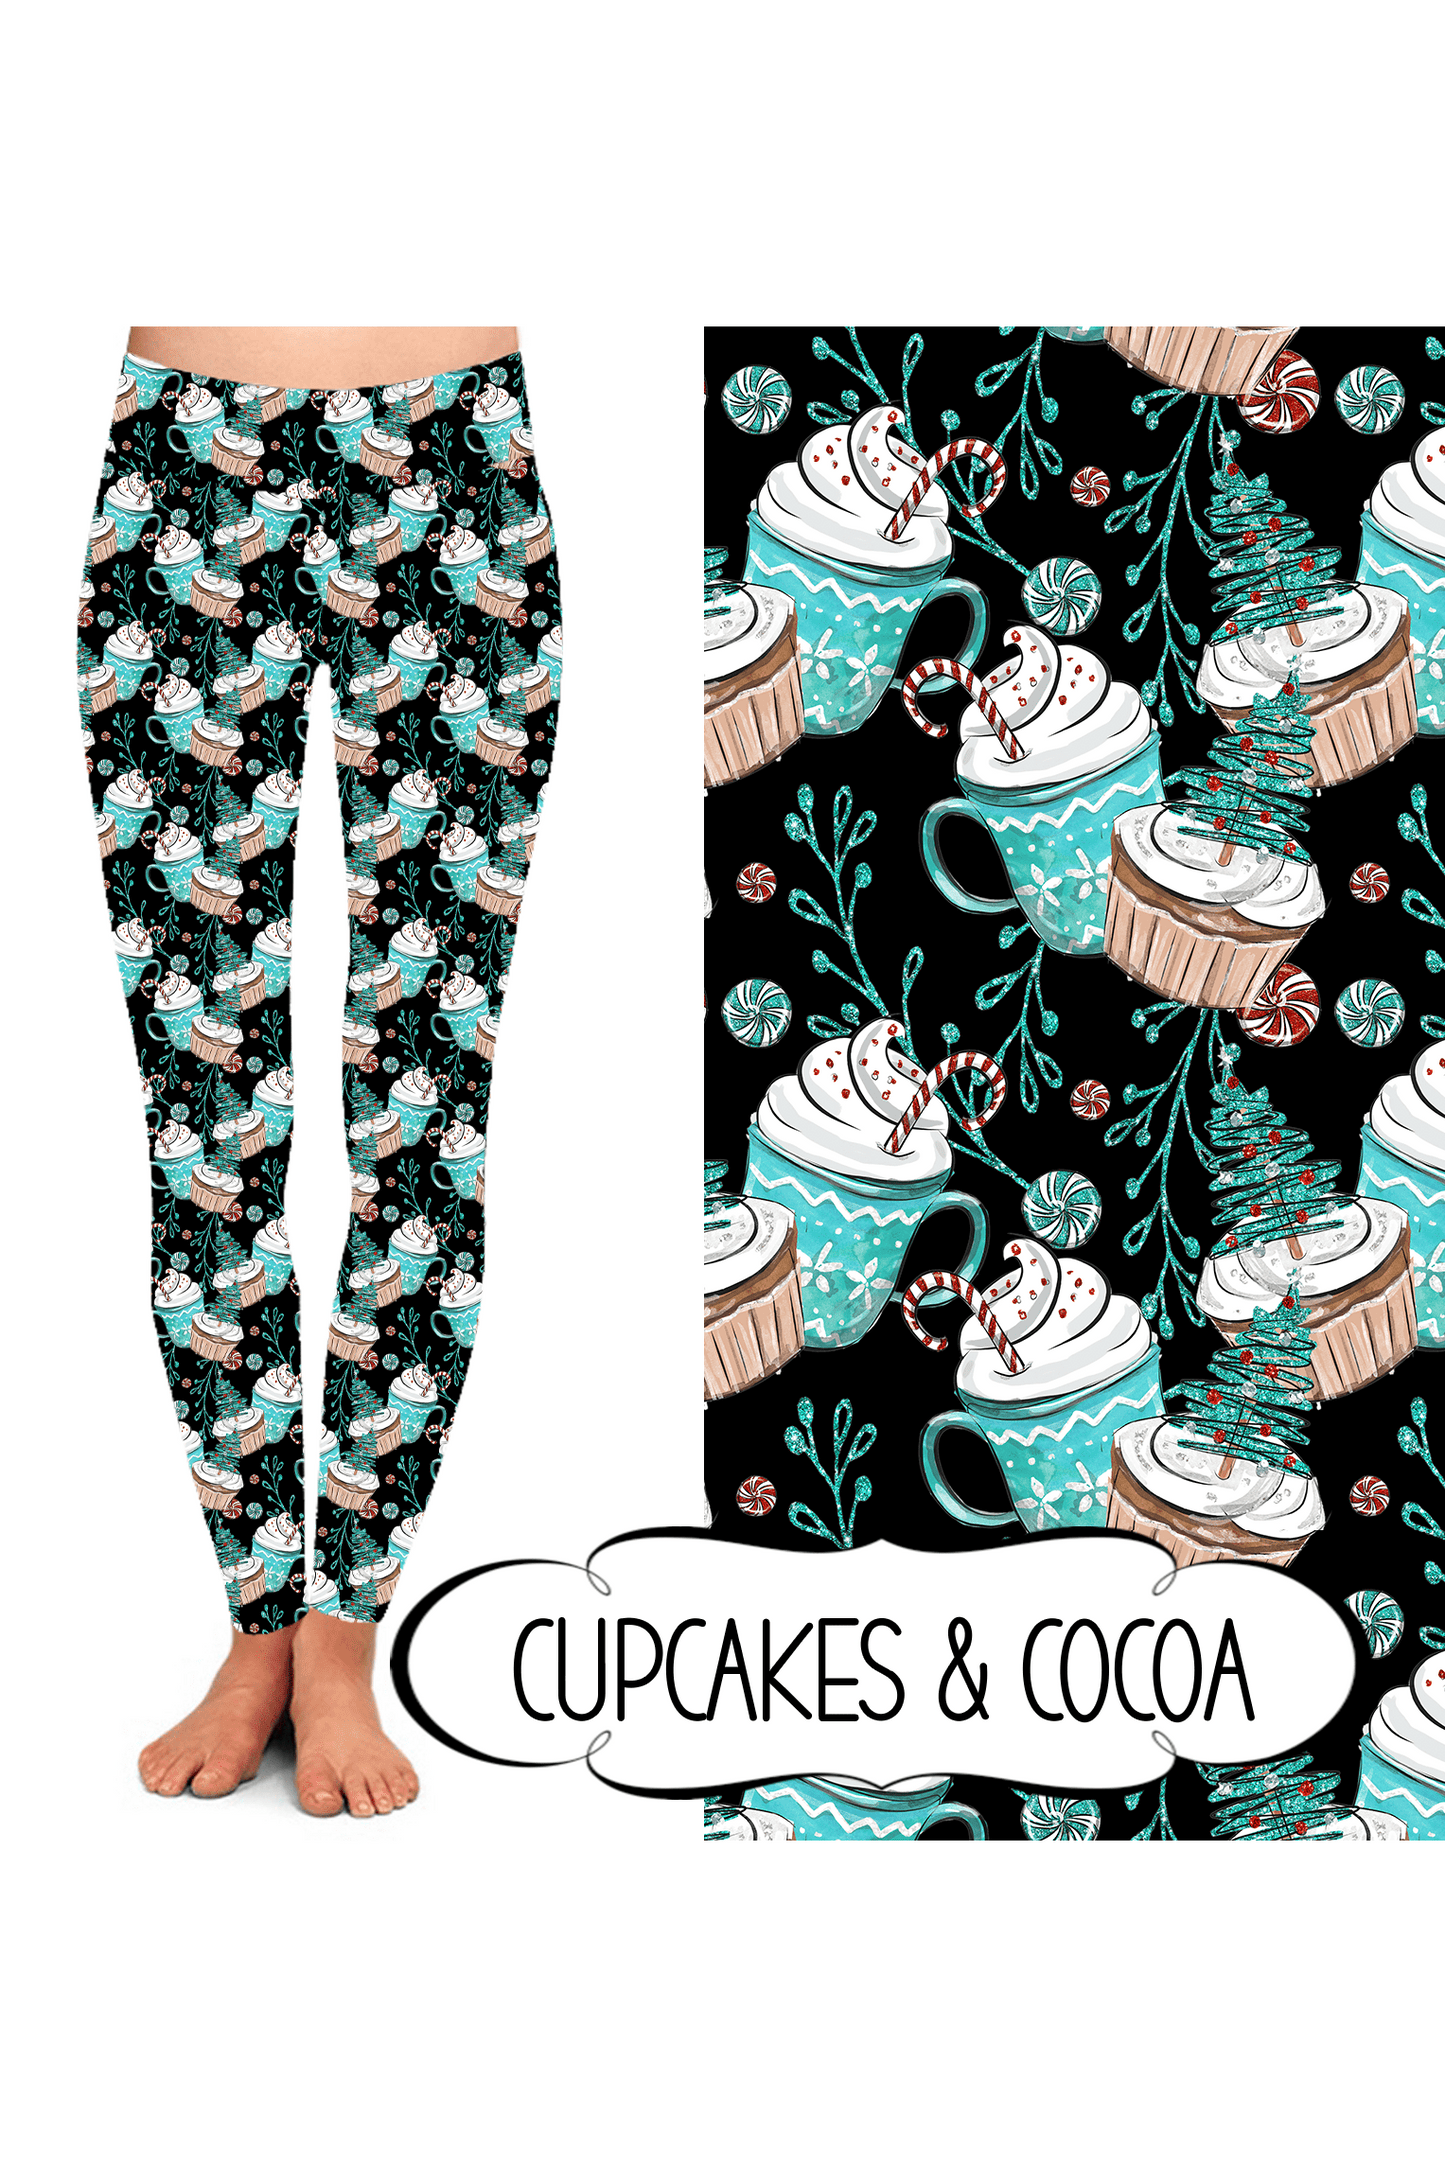 Yoga Style Leggings - Cupcakes & Cocoa by Eleven & Co.